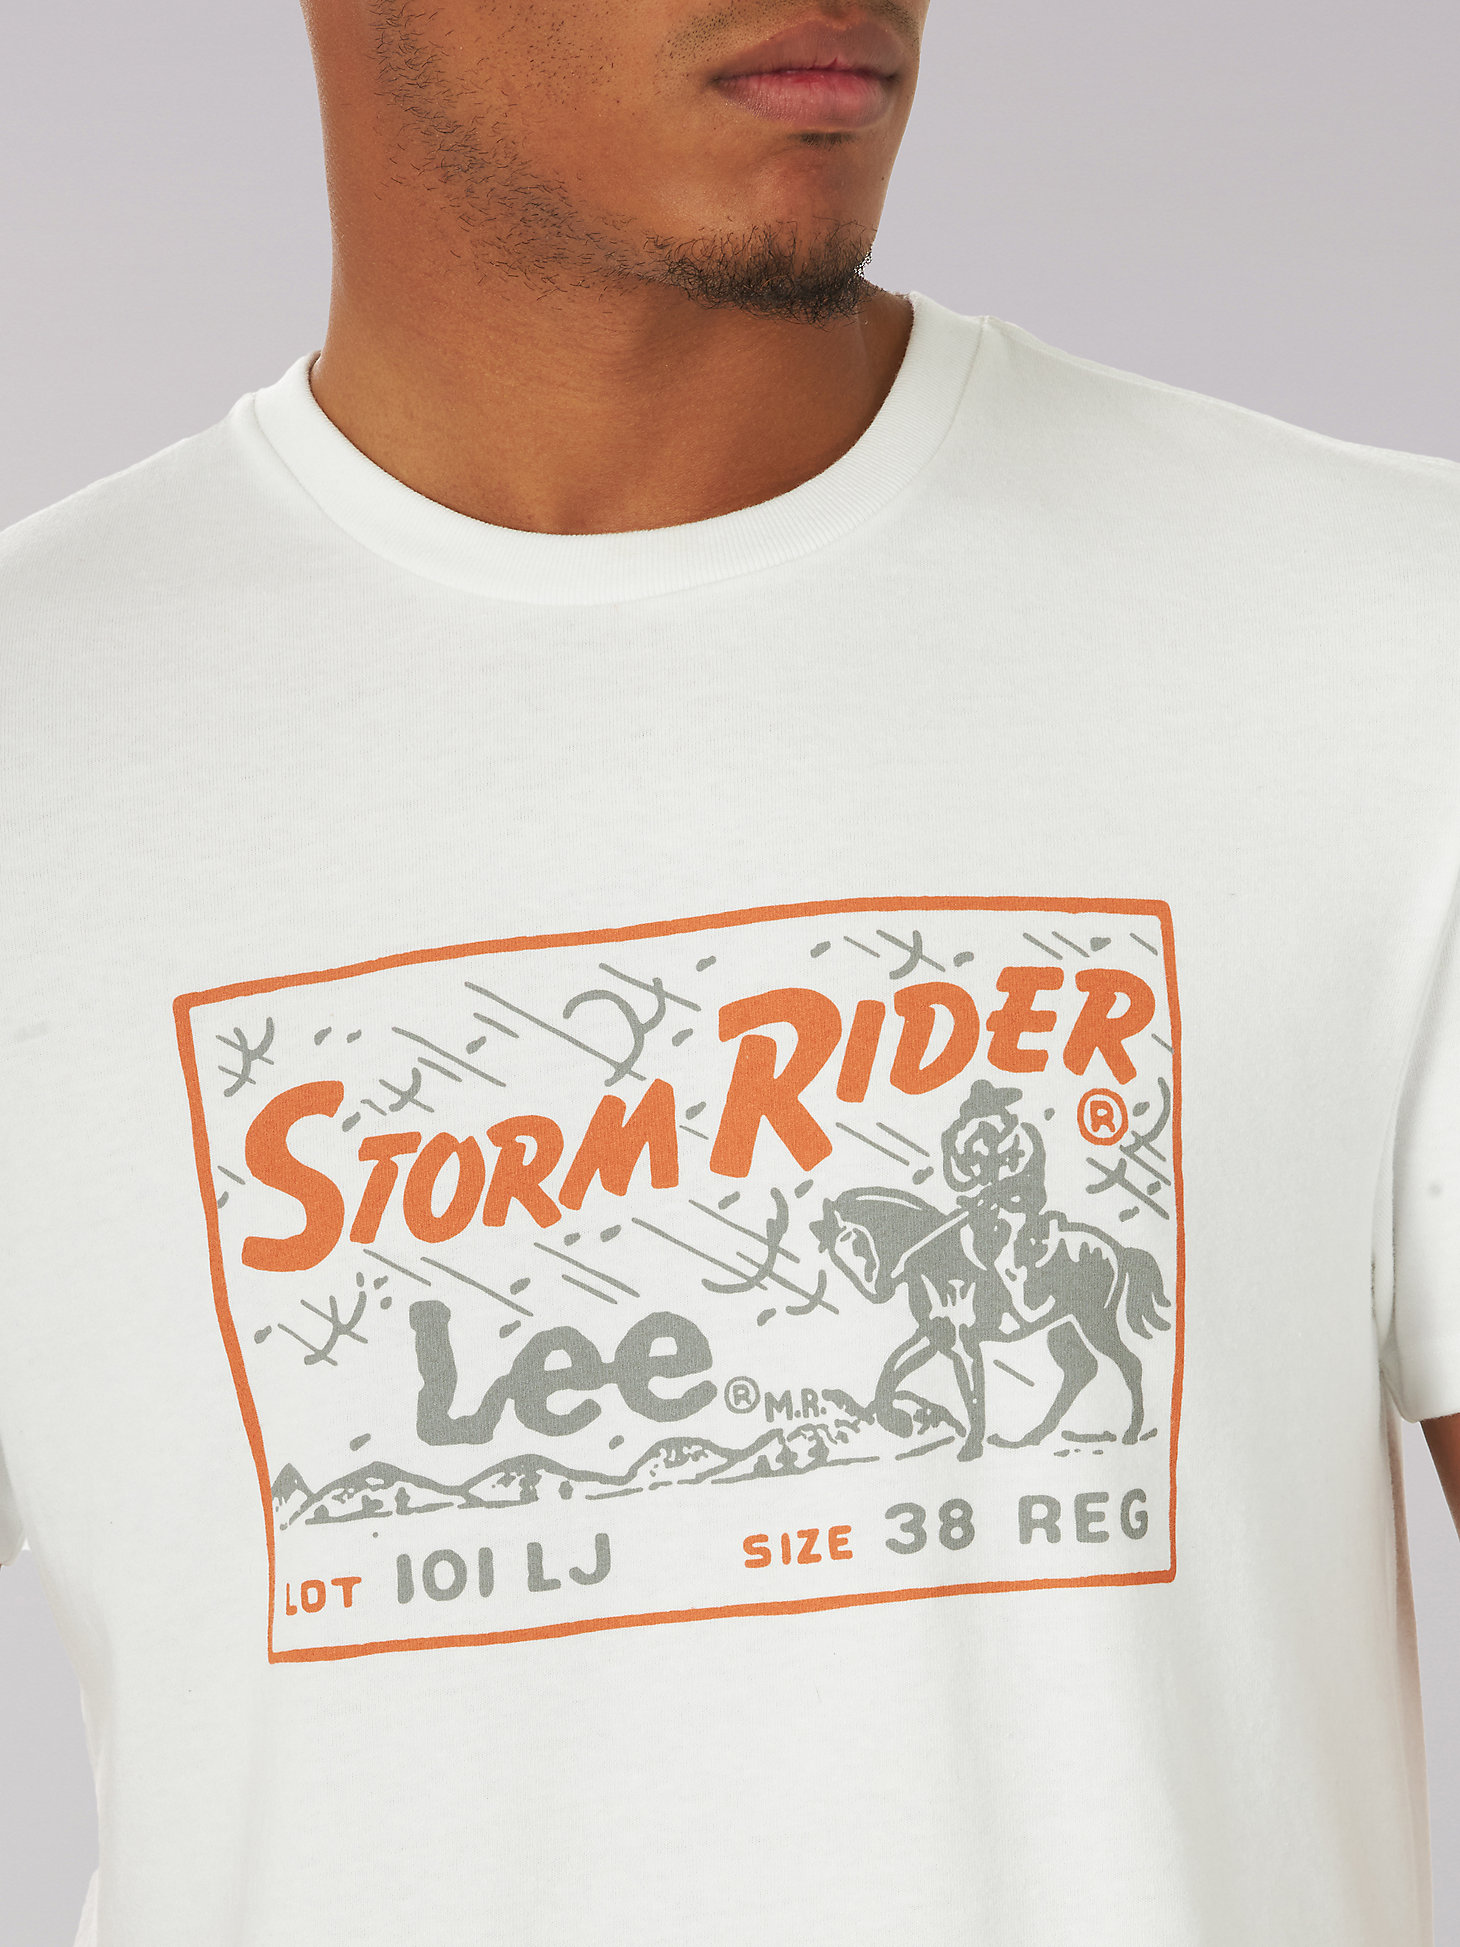 Men's Heritage Storm Rider Graphic Tee in Solid White alternative view 2